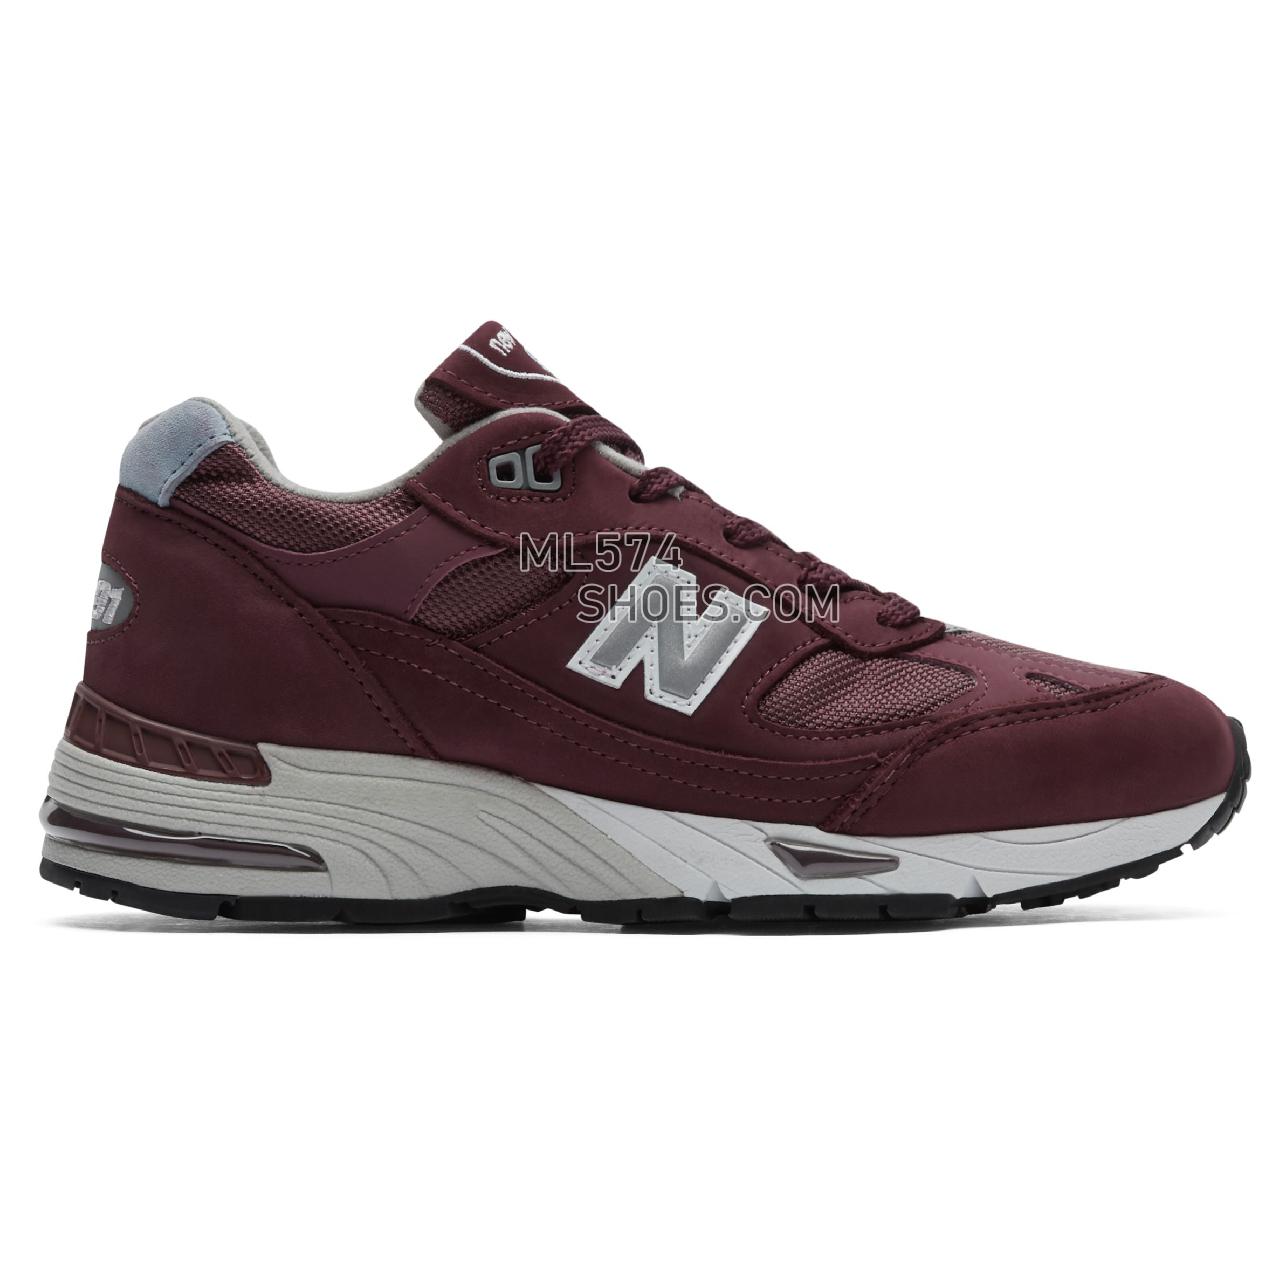 New Balance Made in UK 991 - Men's Made in UK 991 Classic - Burgundy with Blue - W991BBL